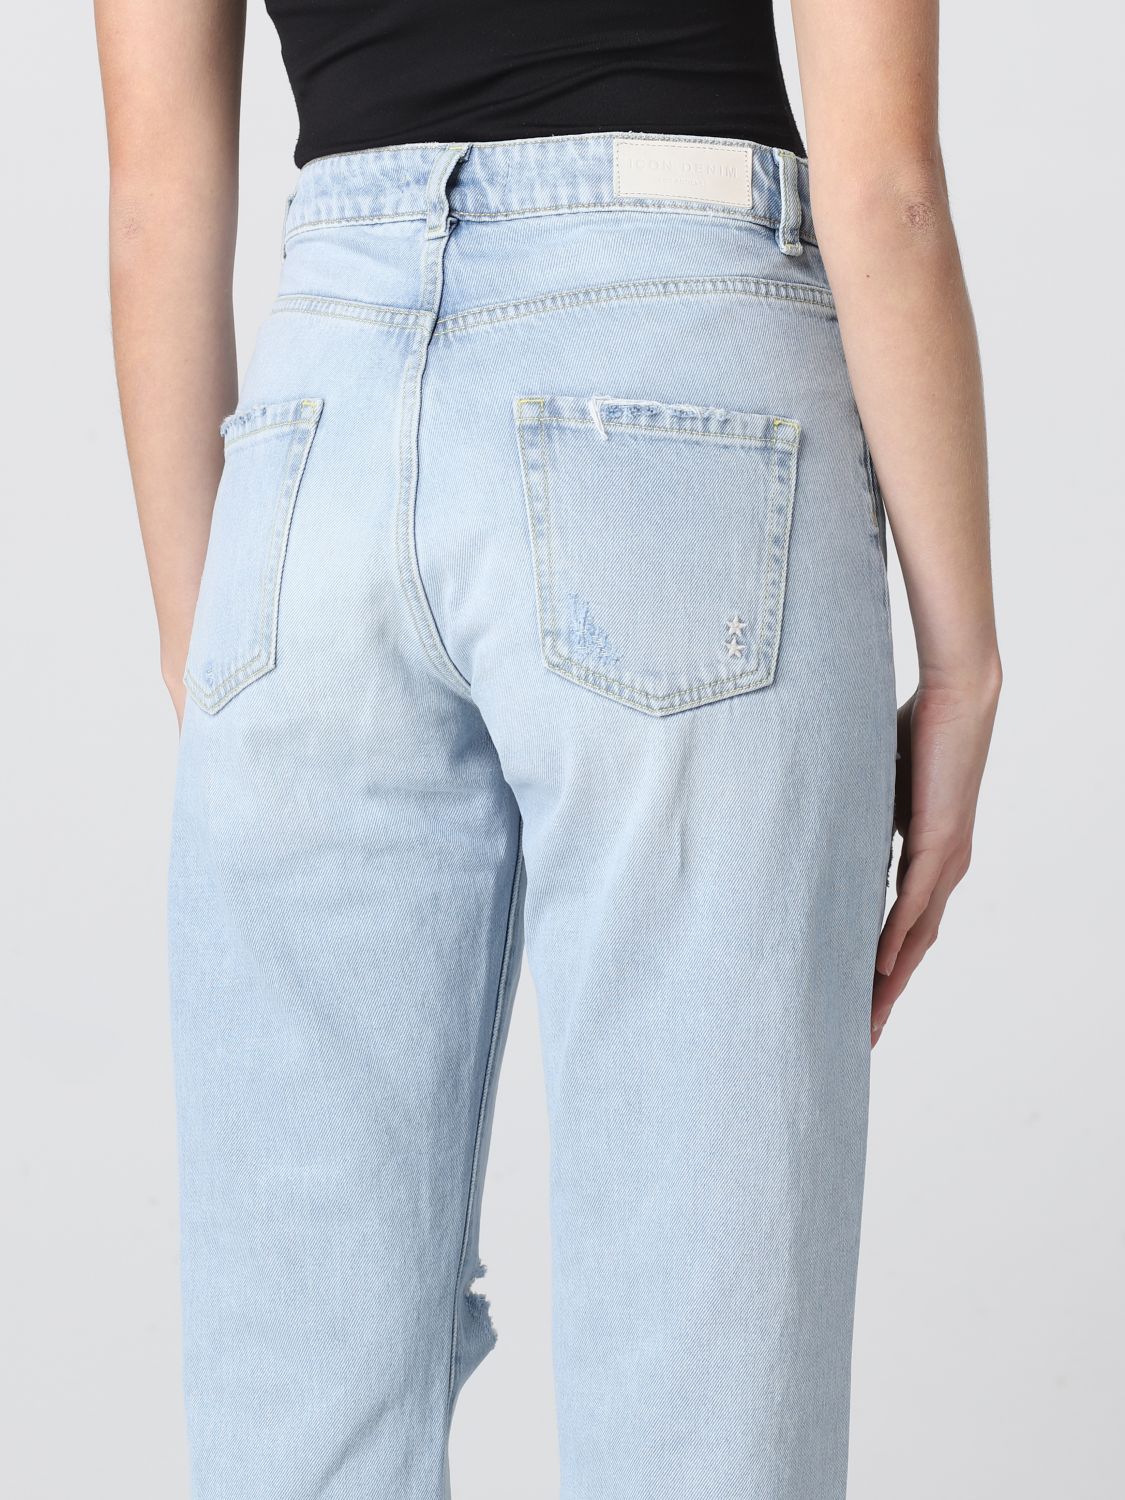 Jeans Icon Denim Los Angeles: Icon Denim Los Angeles jeans in ripped denim stone washed 3